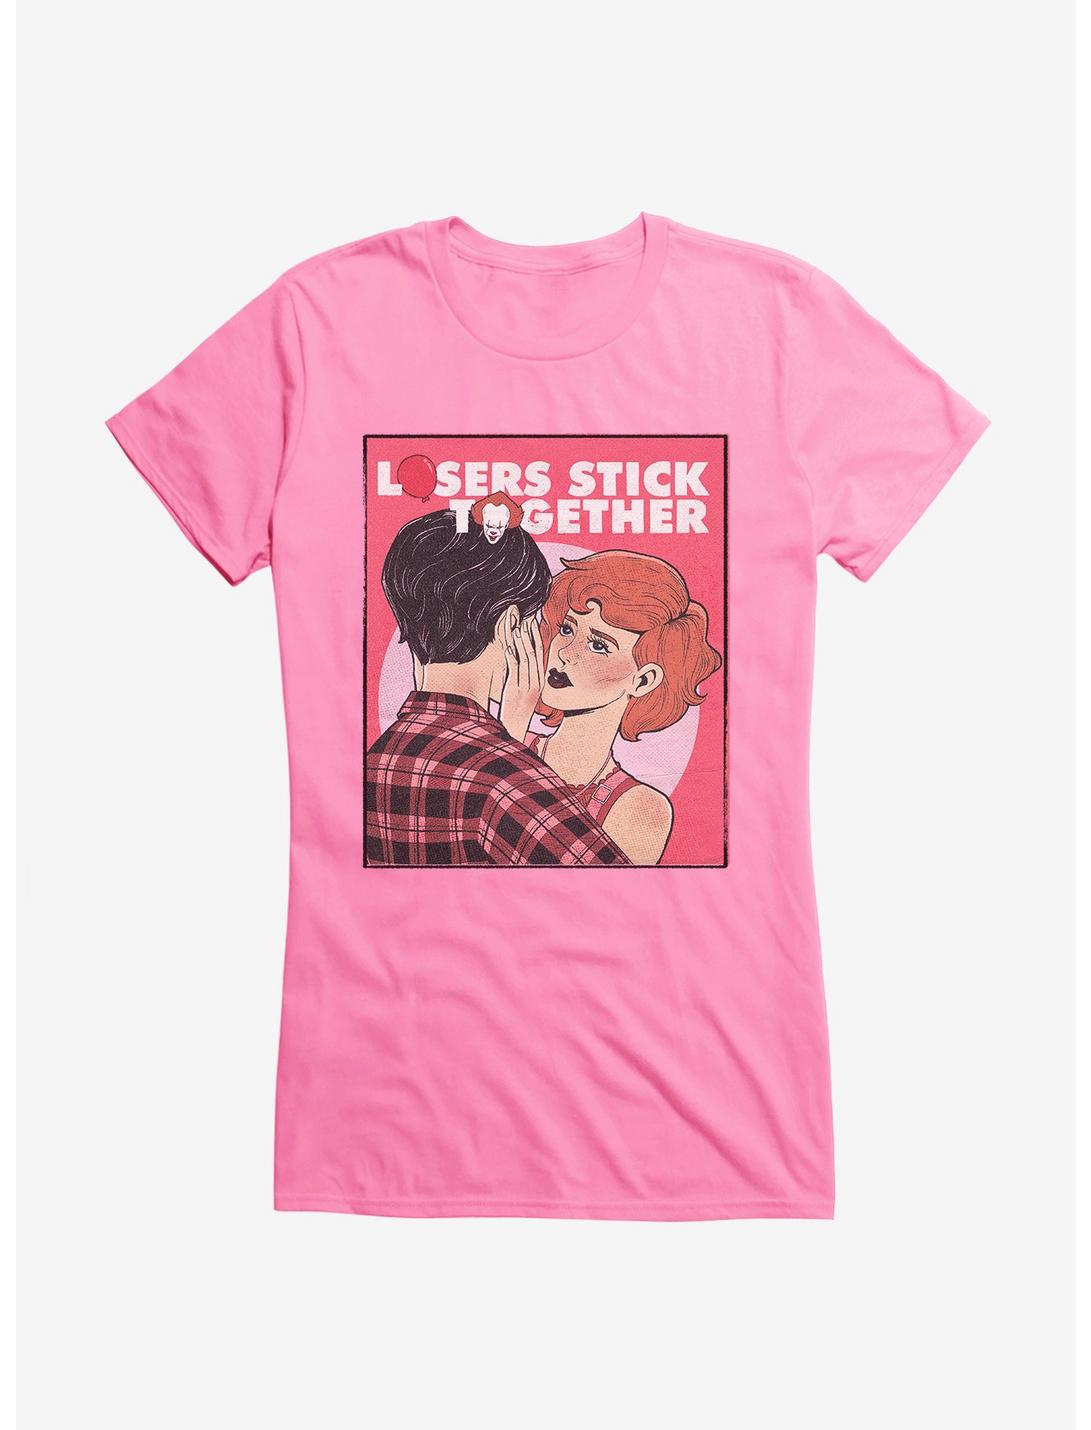 IT2 Losers Stick Together Girls T-Shirt, , hi-res